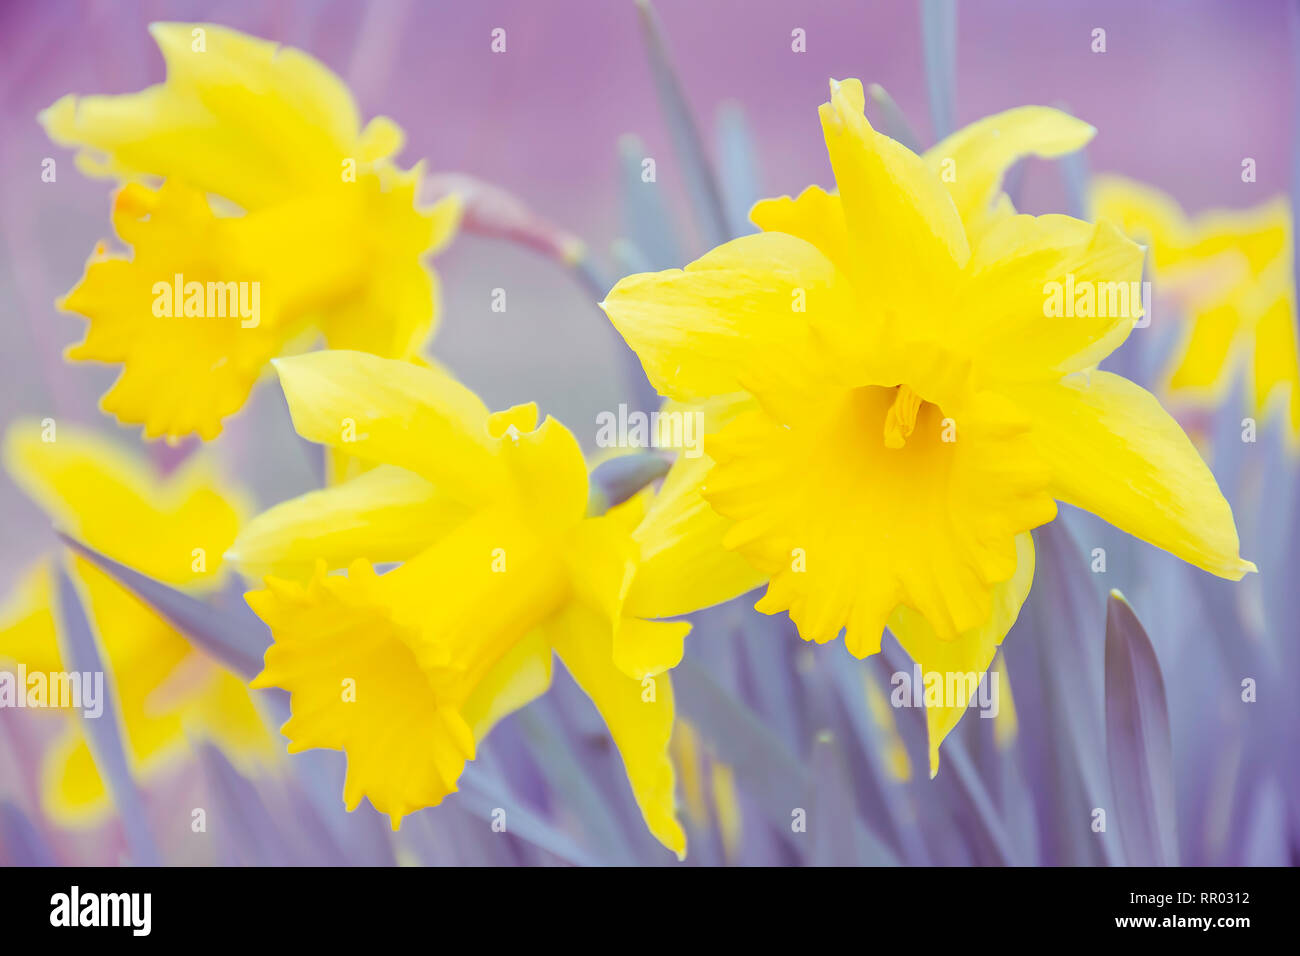 Nature abstract.Daffodil flower heads on bright and vibrant blurred violet background.Springtime freshness and colour match.Dreamlike flower image. Stock Photo